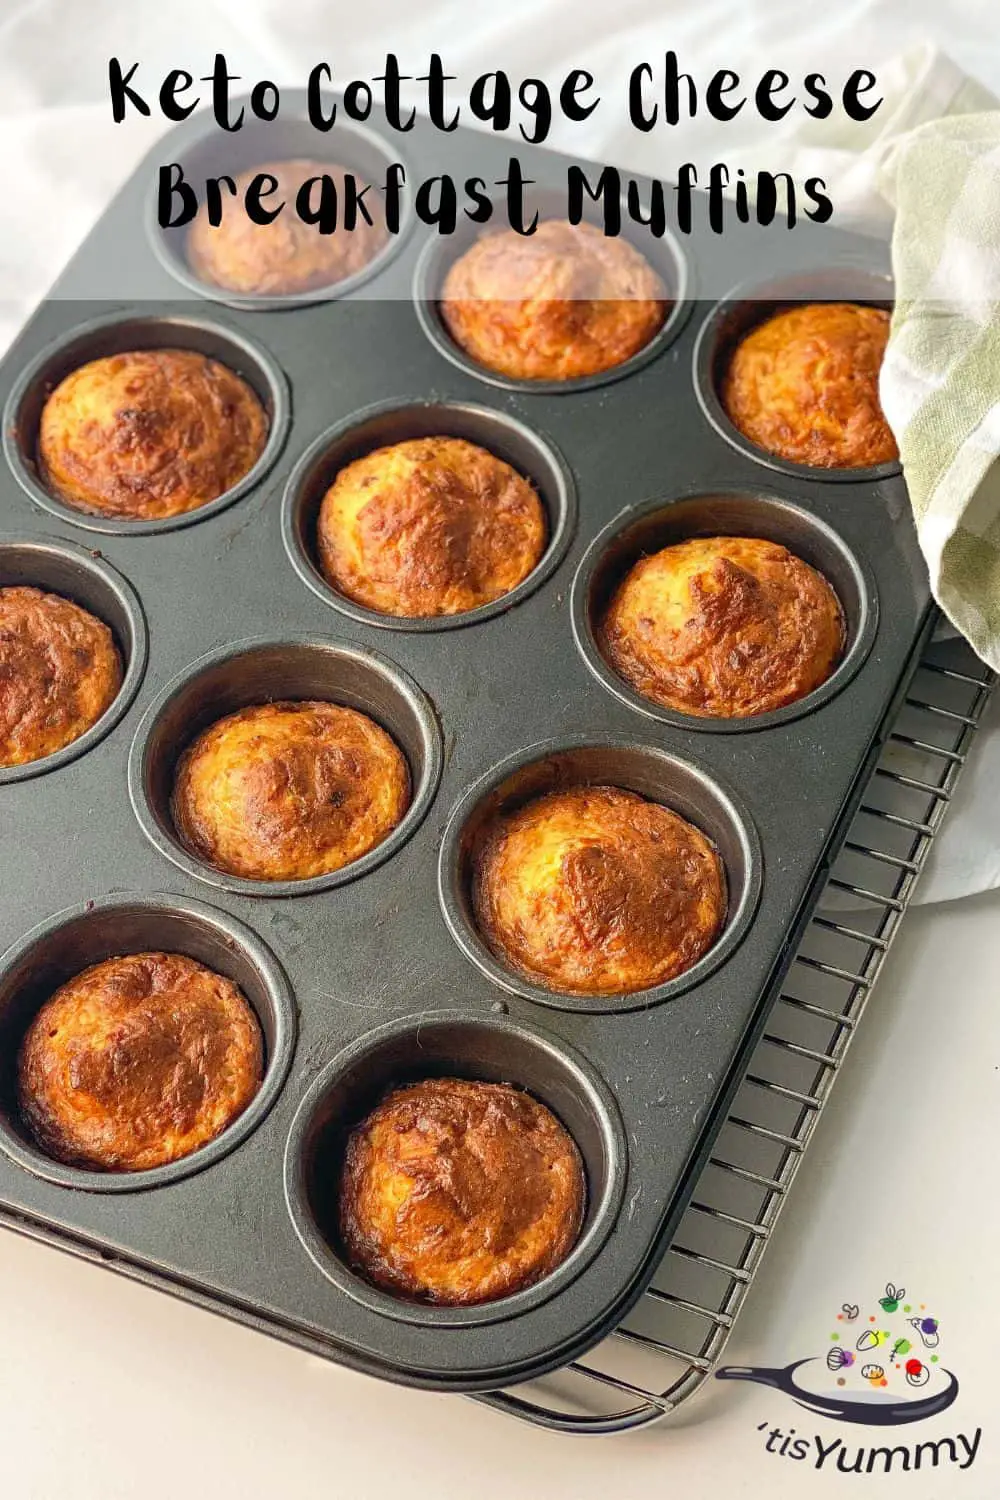 keto cottage cheese breakfast muffins still in the tin!